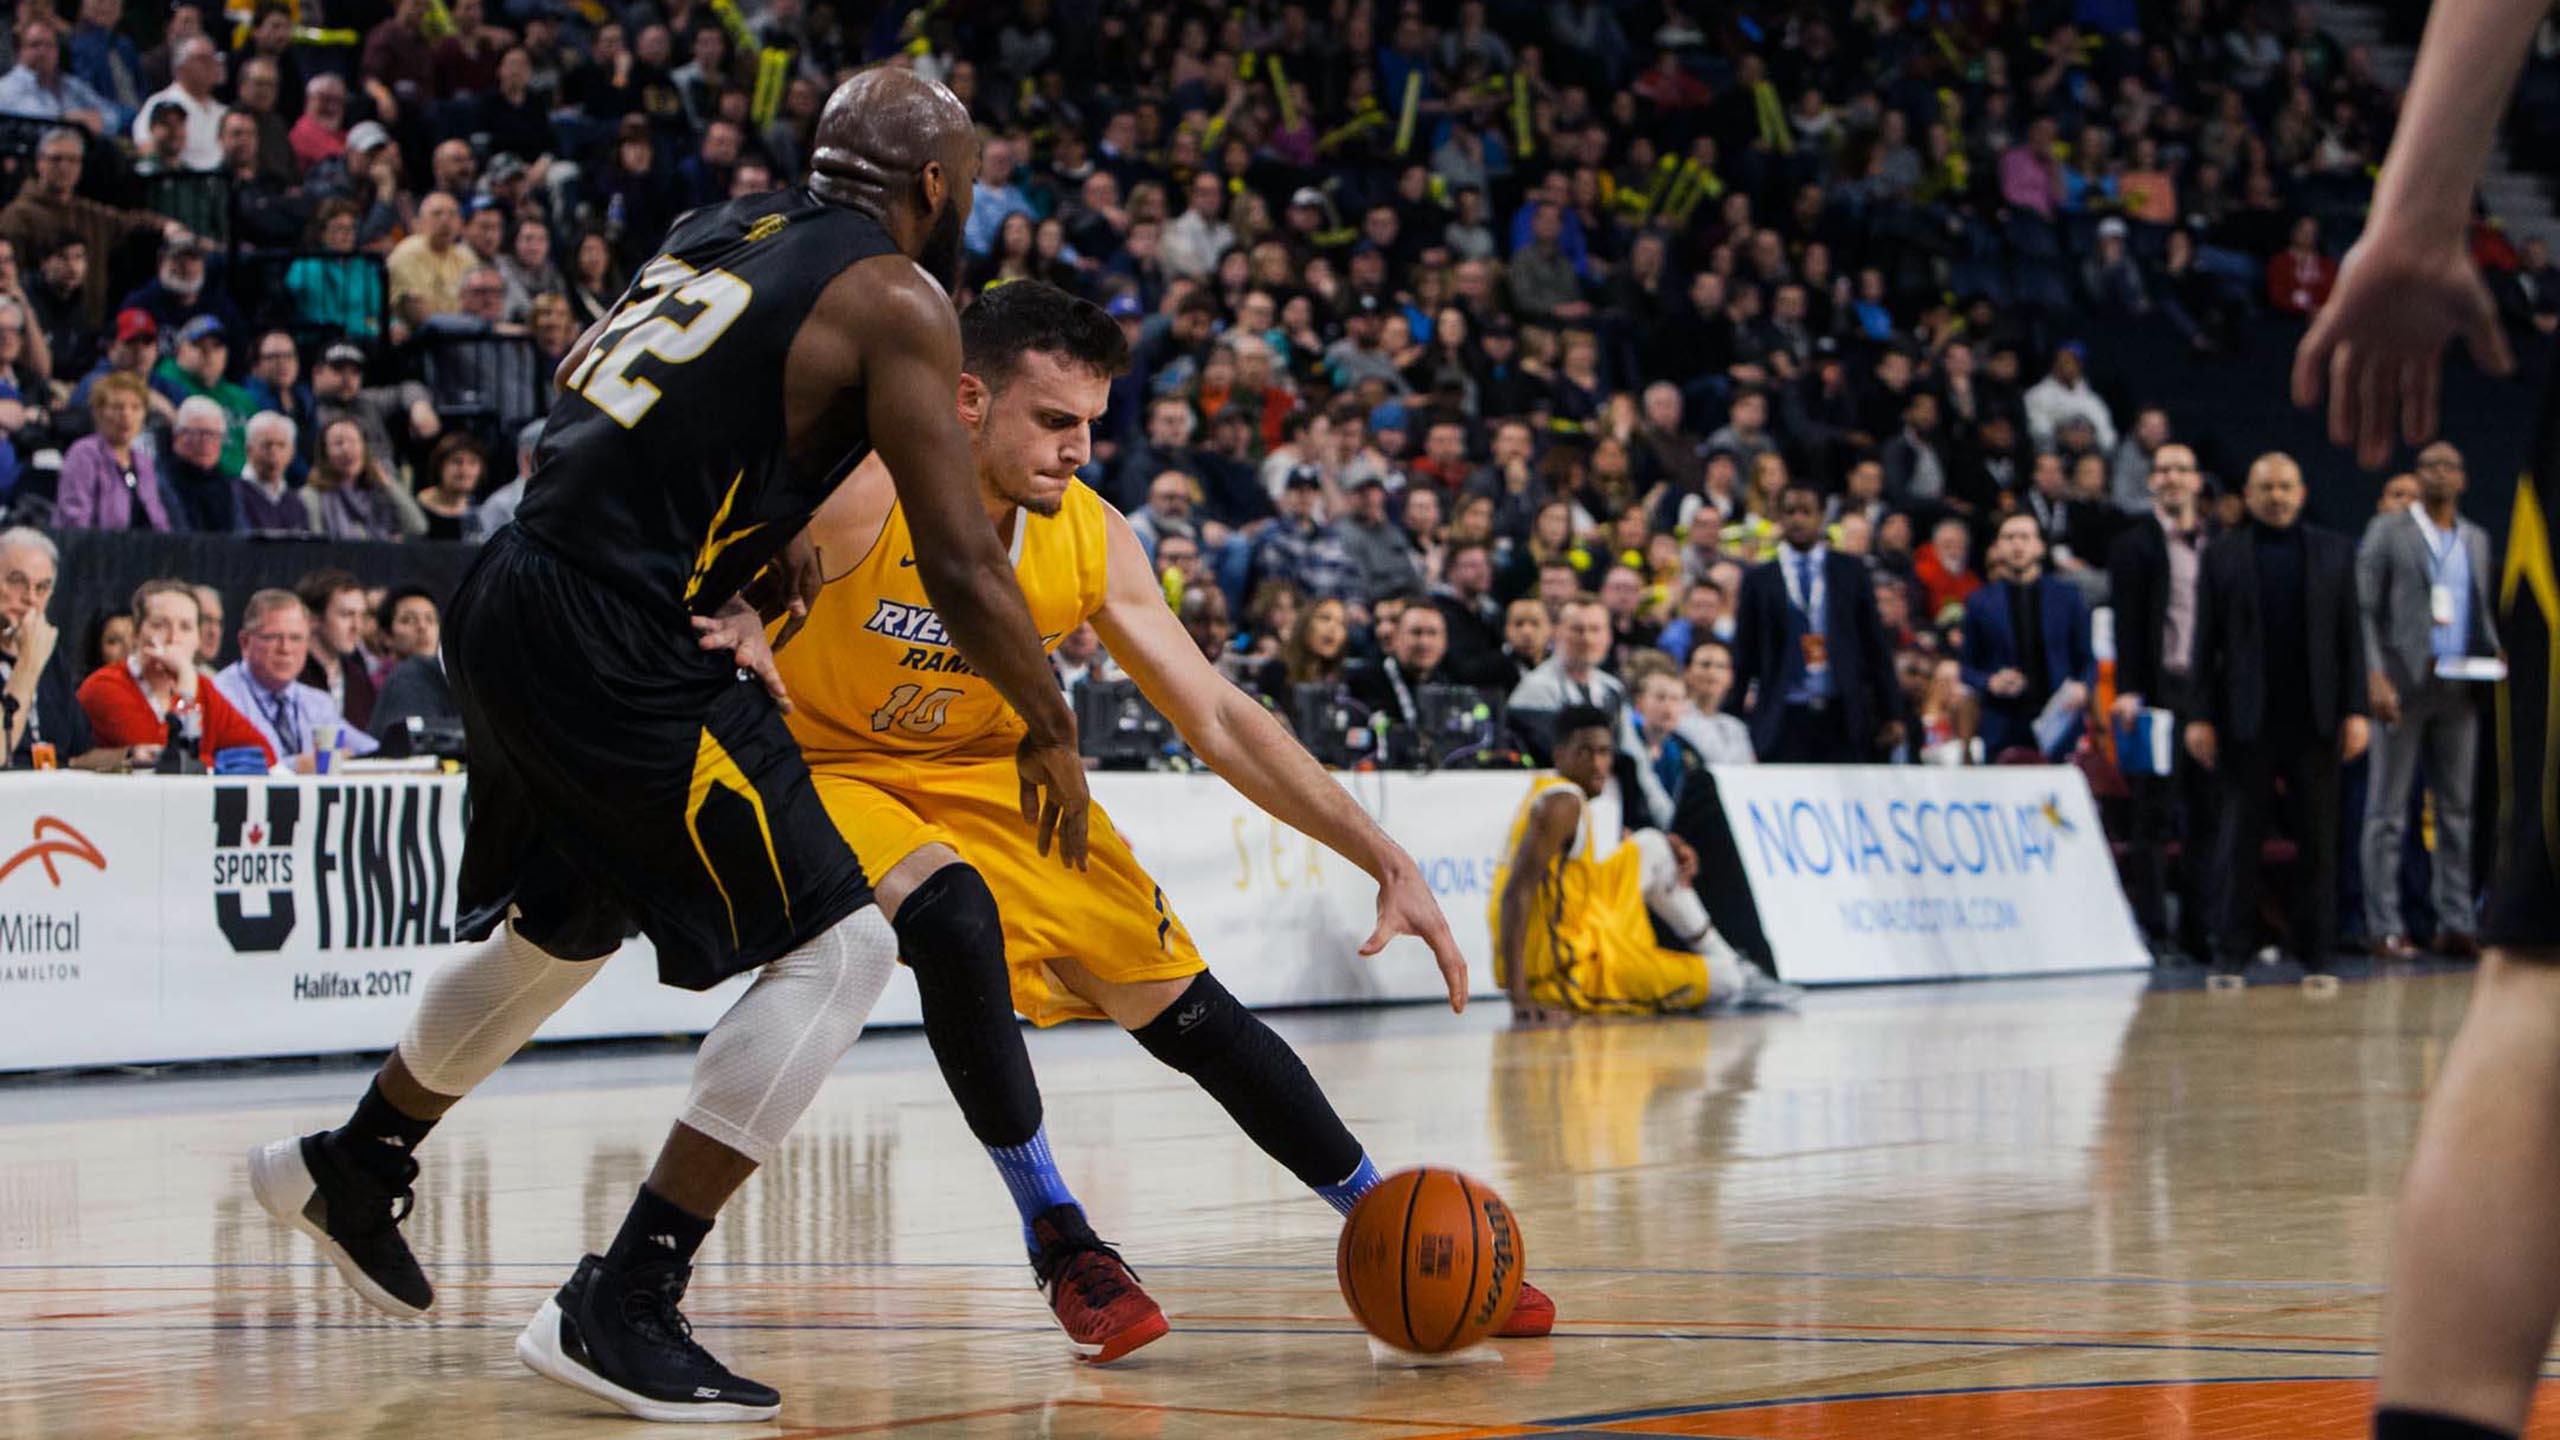 A Ryerson player battles it out on the court against a Dalhousie player, at the March 11 semifinals